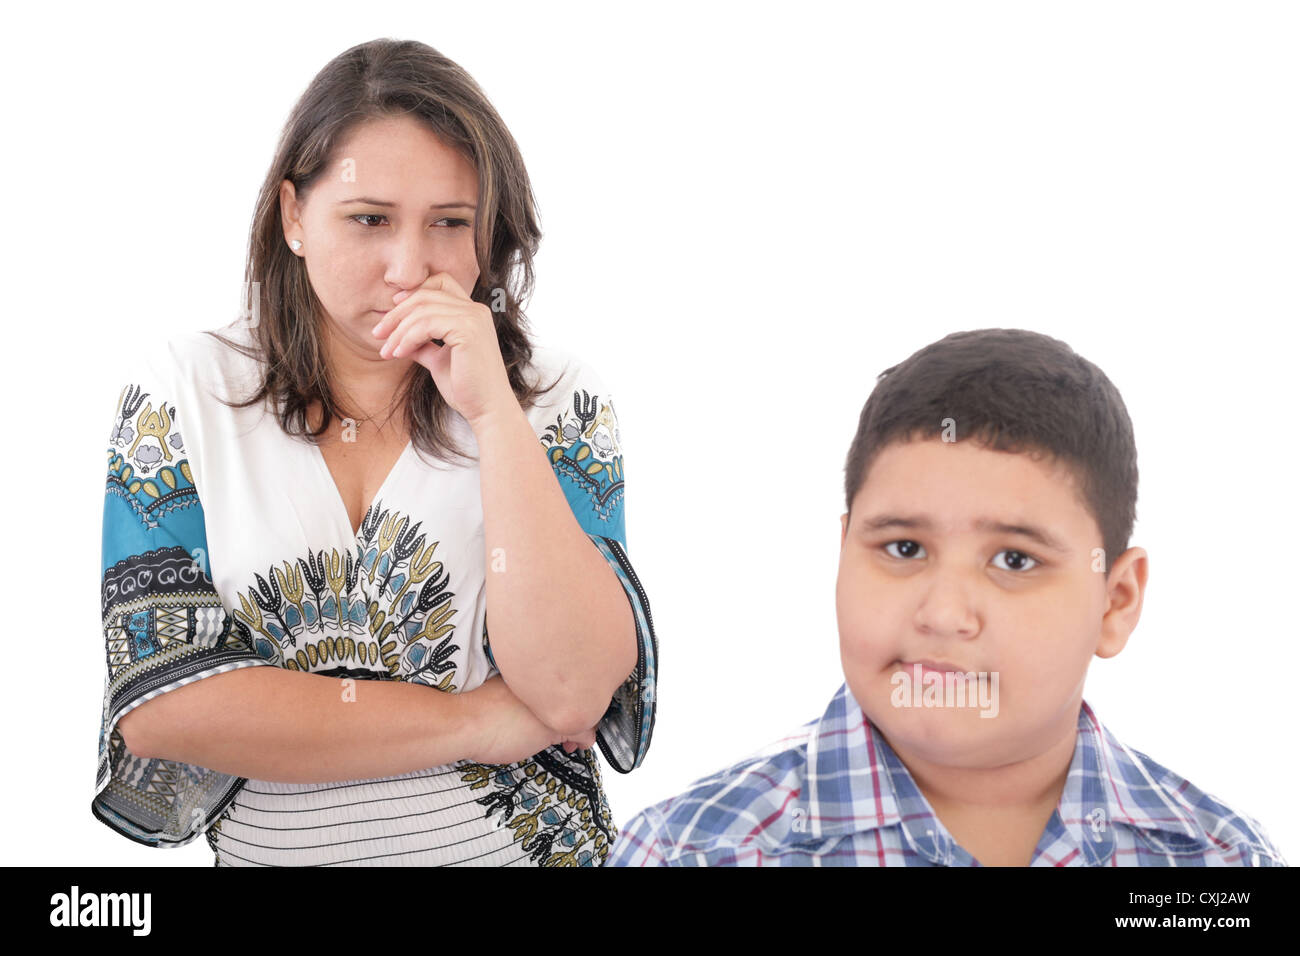 Problems between mother and her son. Family Problems. Focus on the woman Stock Photo